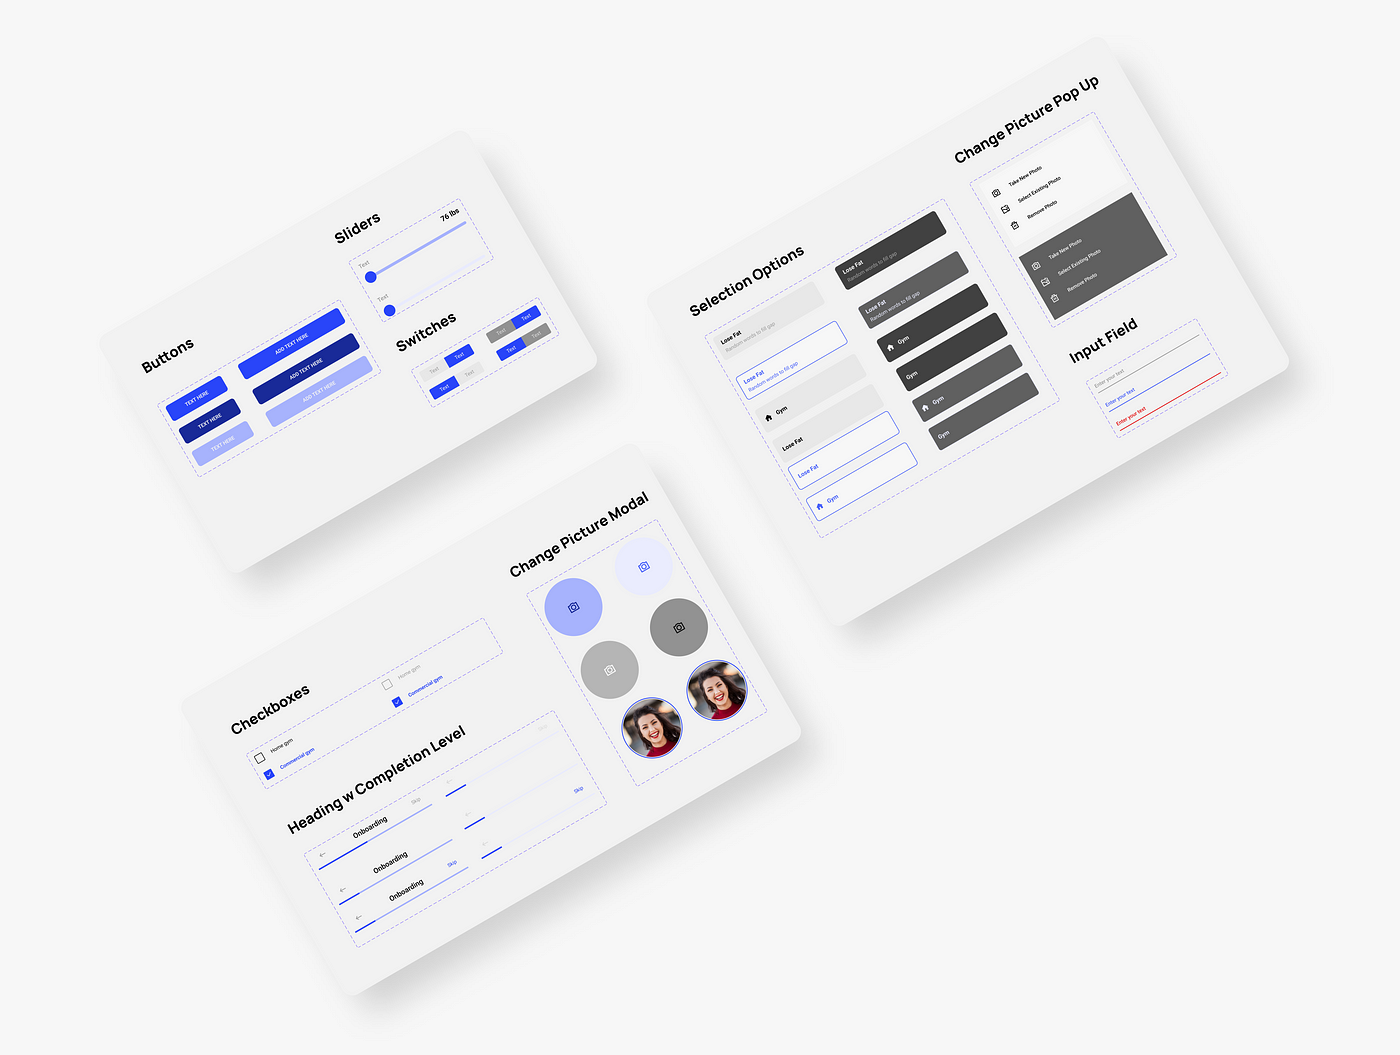 Designing Onboarding Experience for a Fitness App, by Sharanya